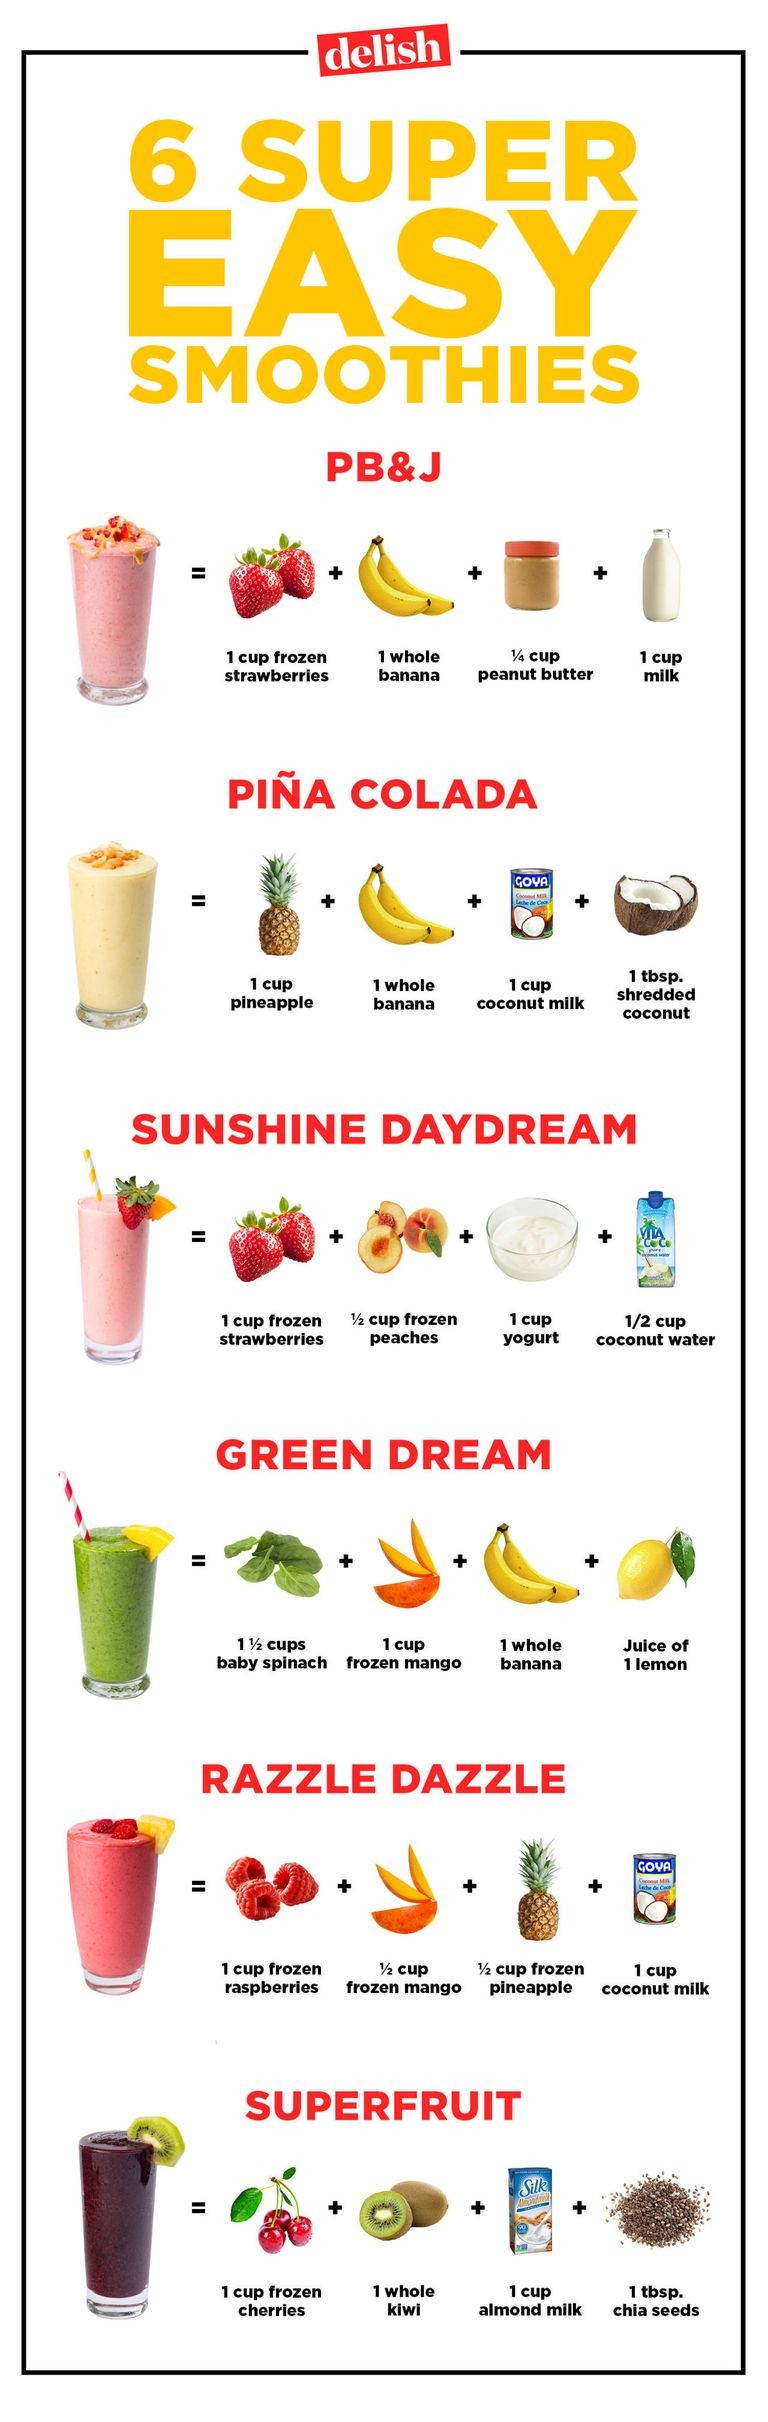 Quick Smoothie Recipes
 20 Healthy Fruit Smoothie Recipes How to Make Healthy